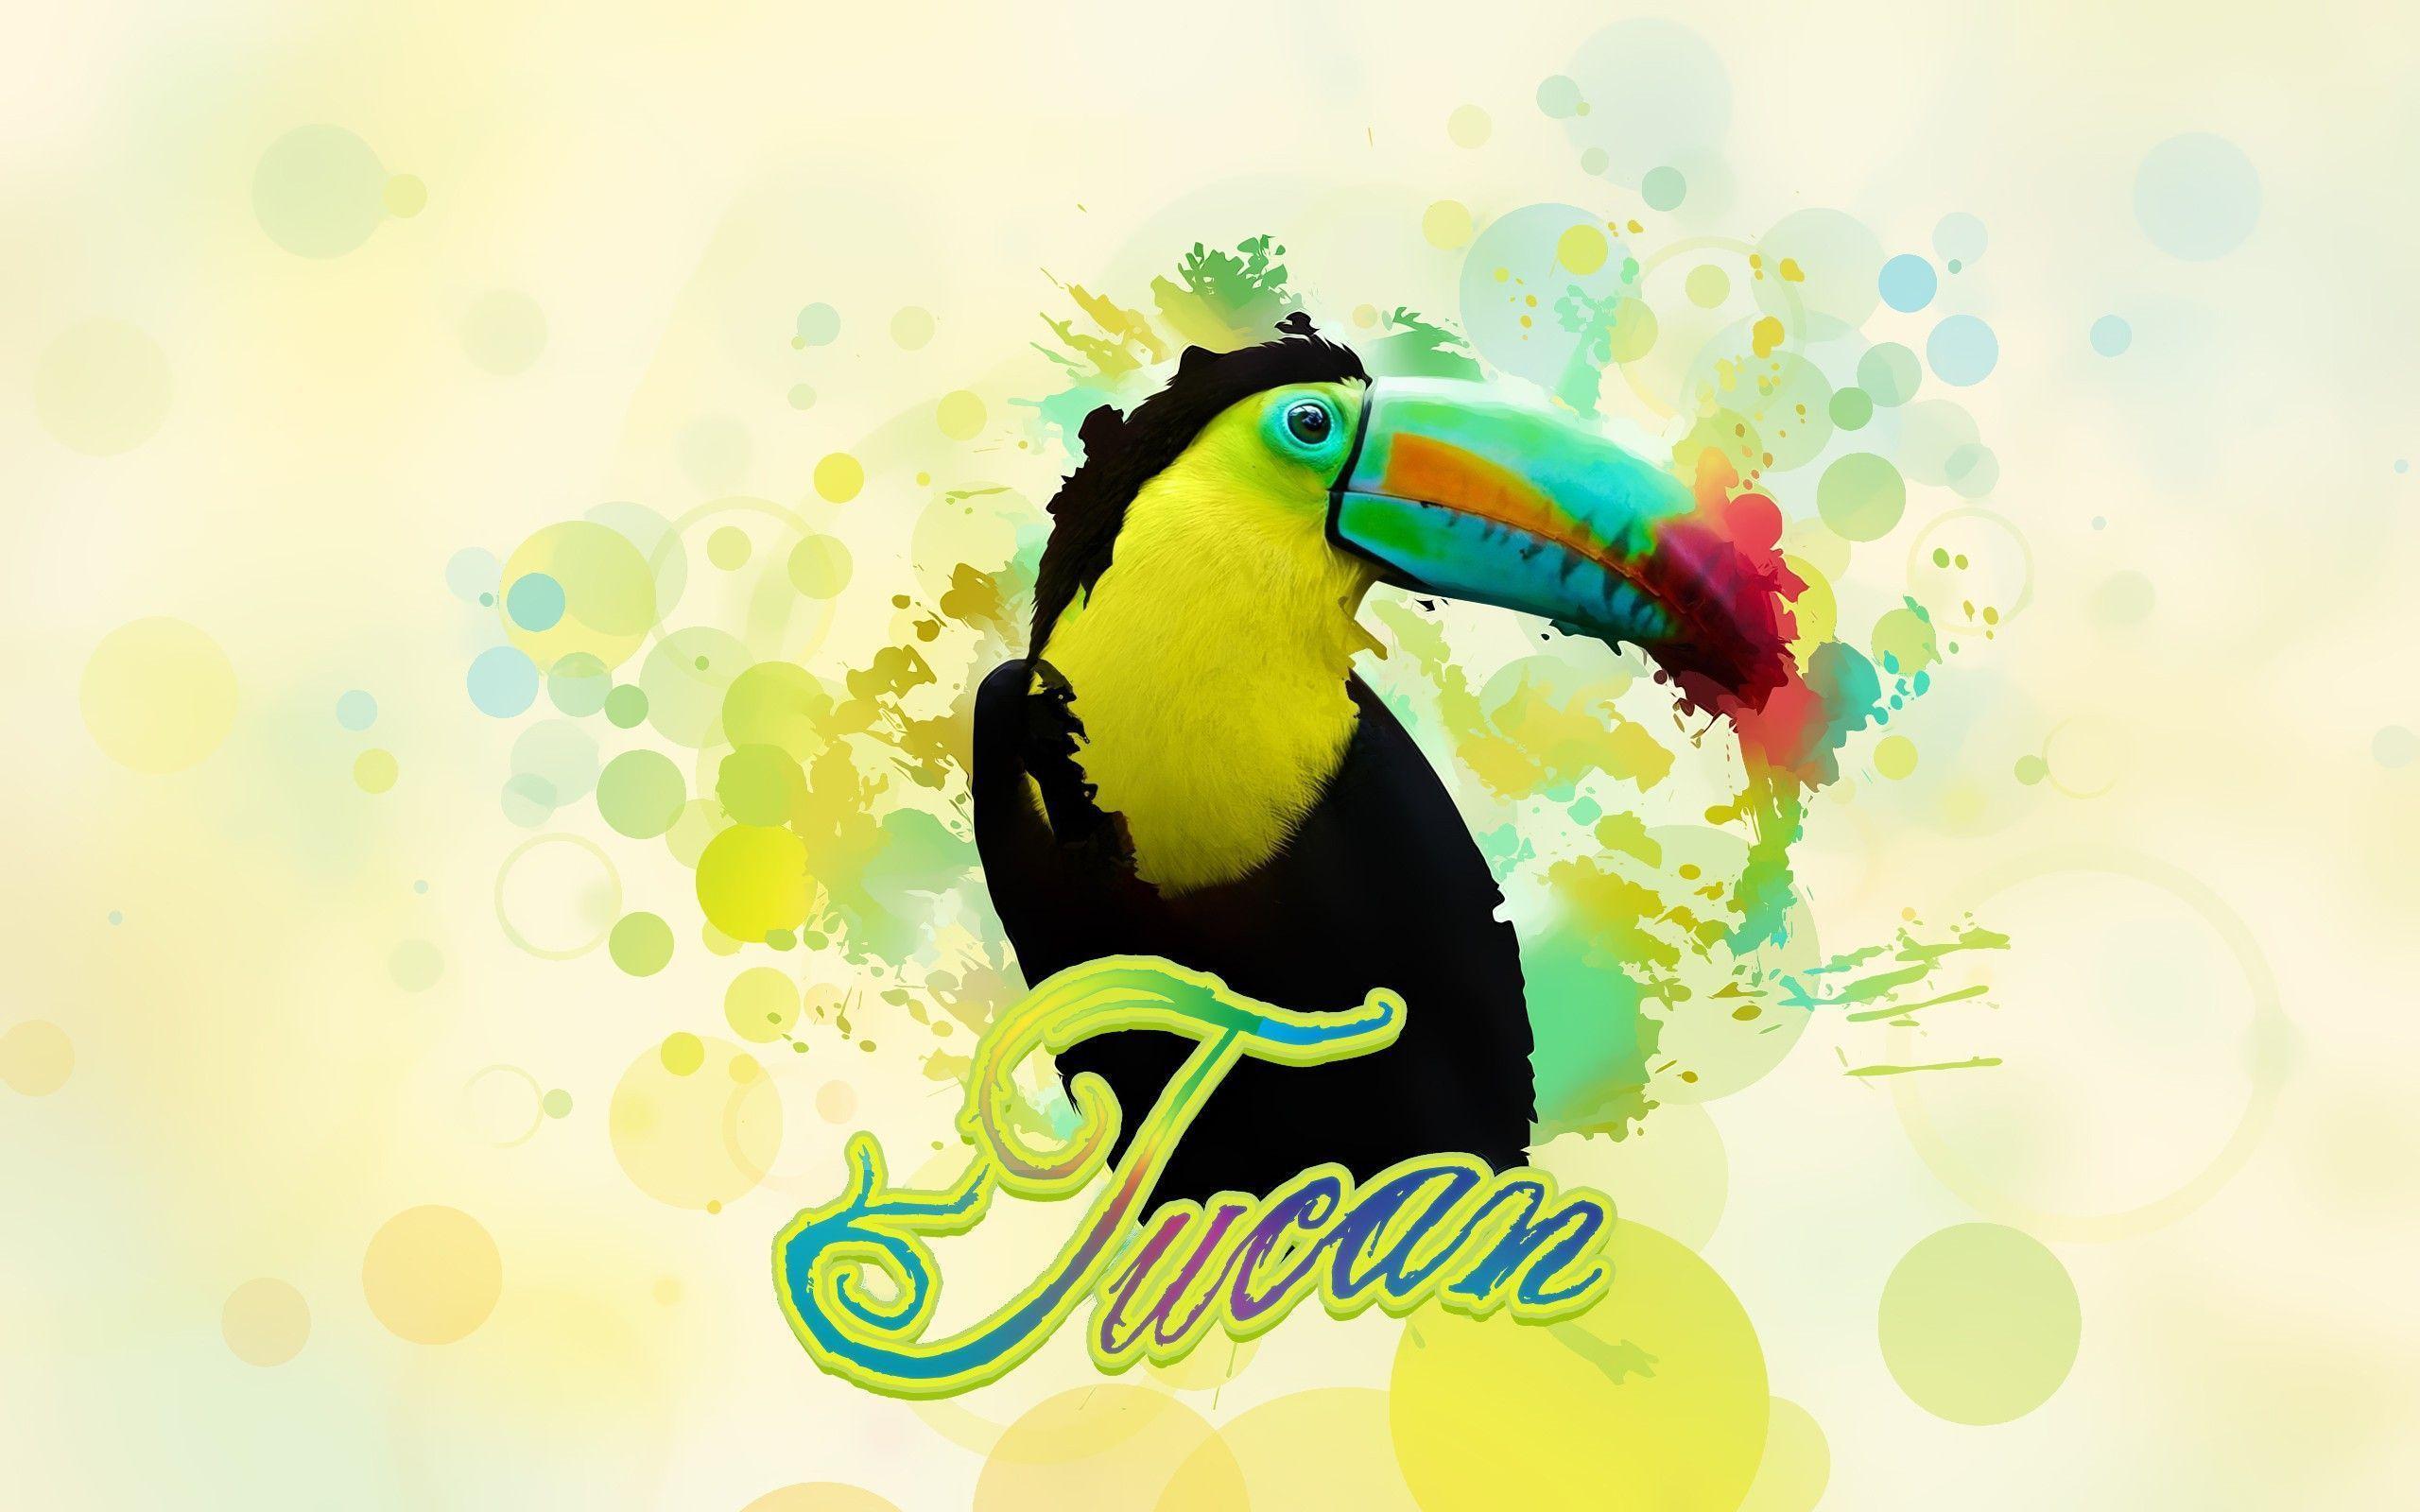 Bird Toucan in the paints wallpaper and image